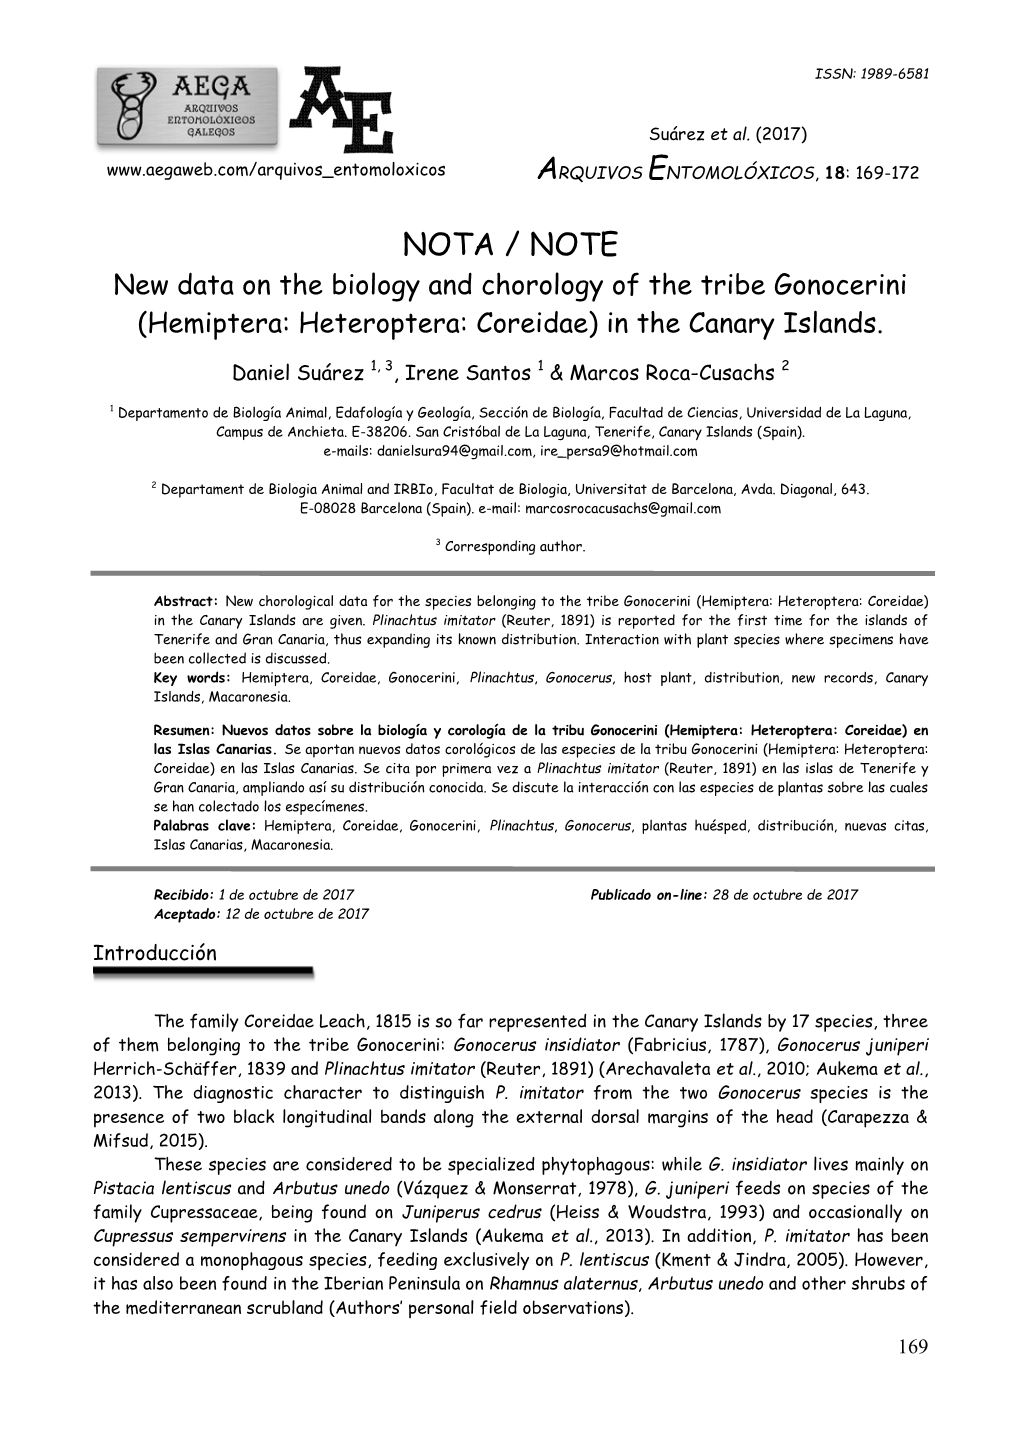 NOTA / NOTE New Data on the Biology and Chorology of the Tribe Gonocerini